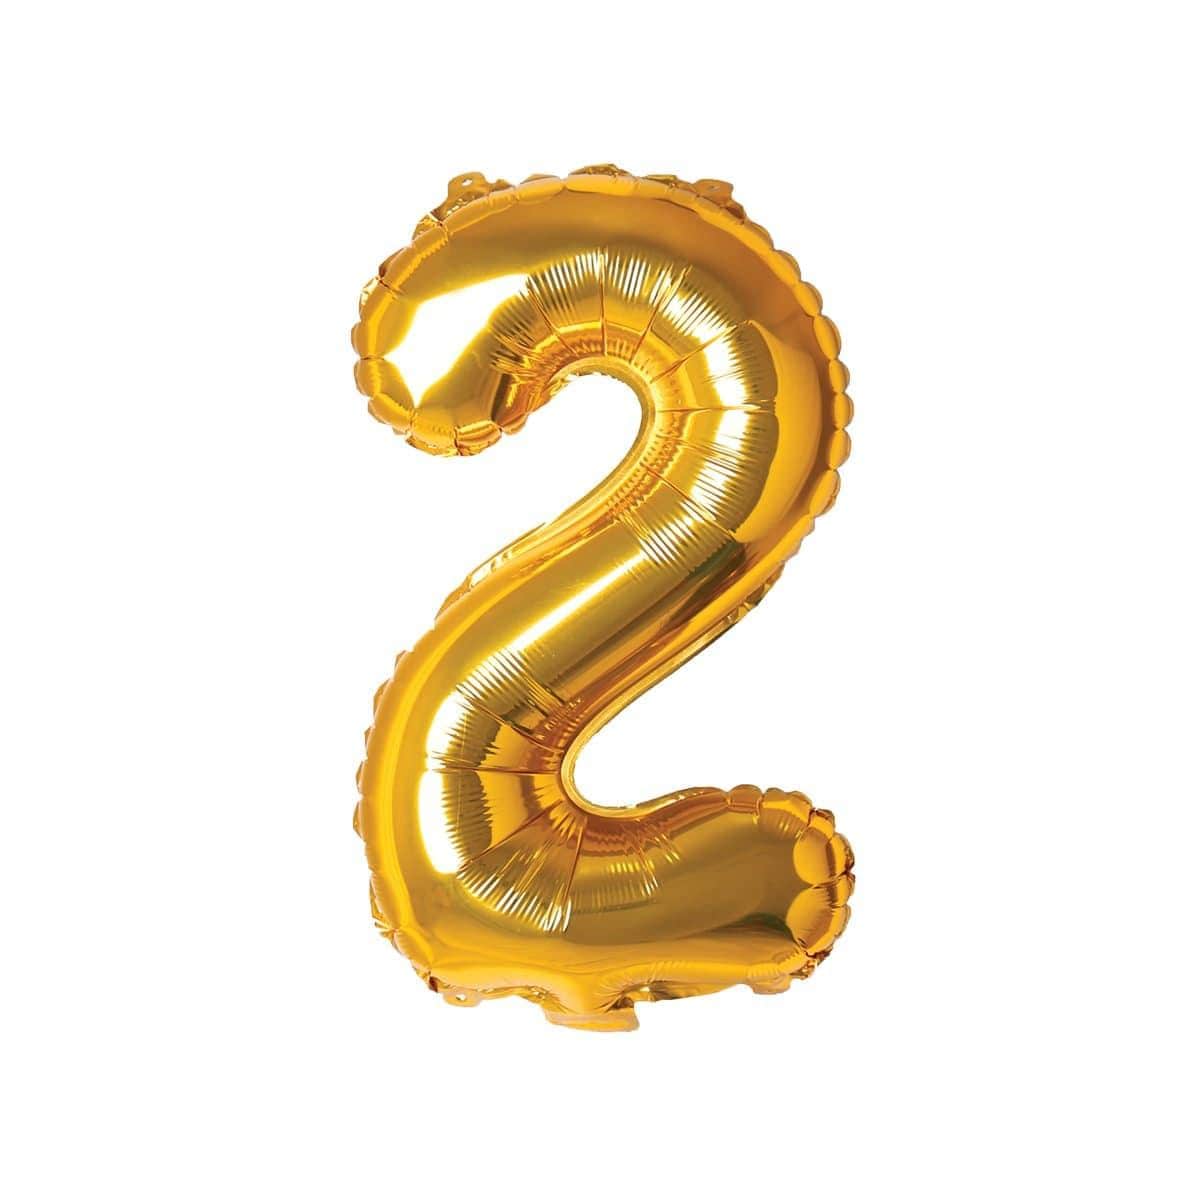 Buy Balloons Gold Number 2 Foil Balloon, 16 Inches sold at Party Expert